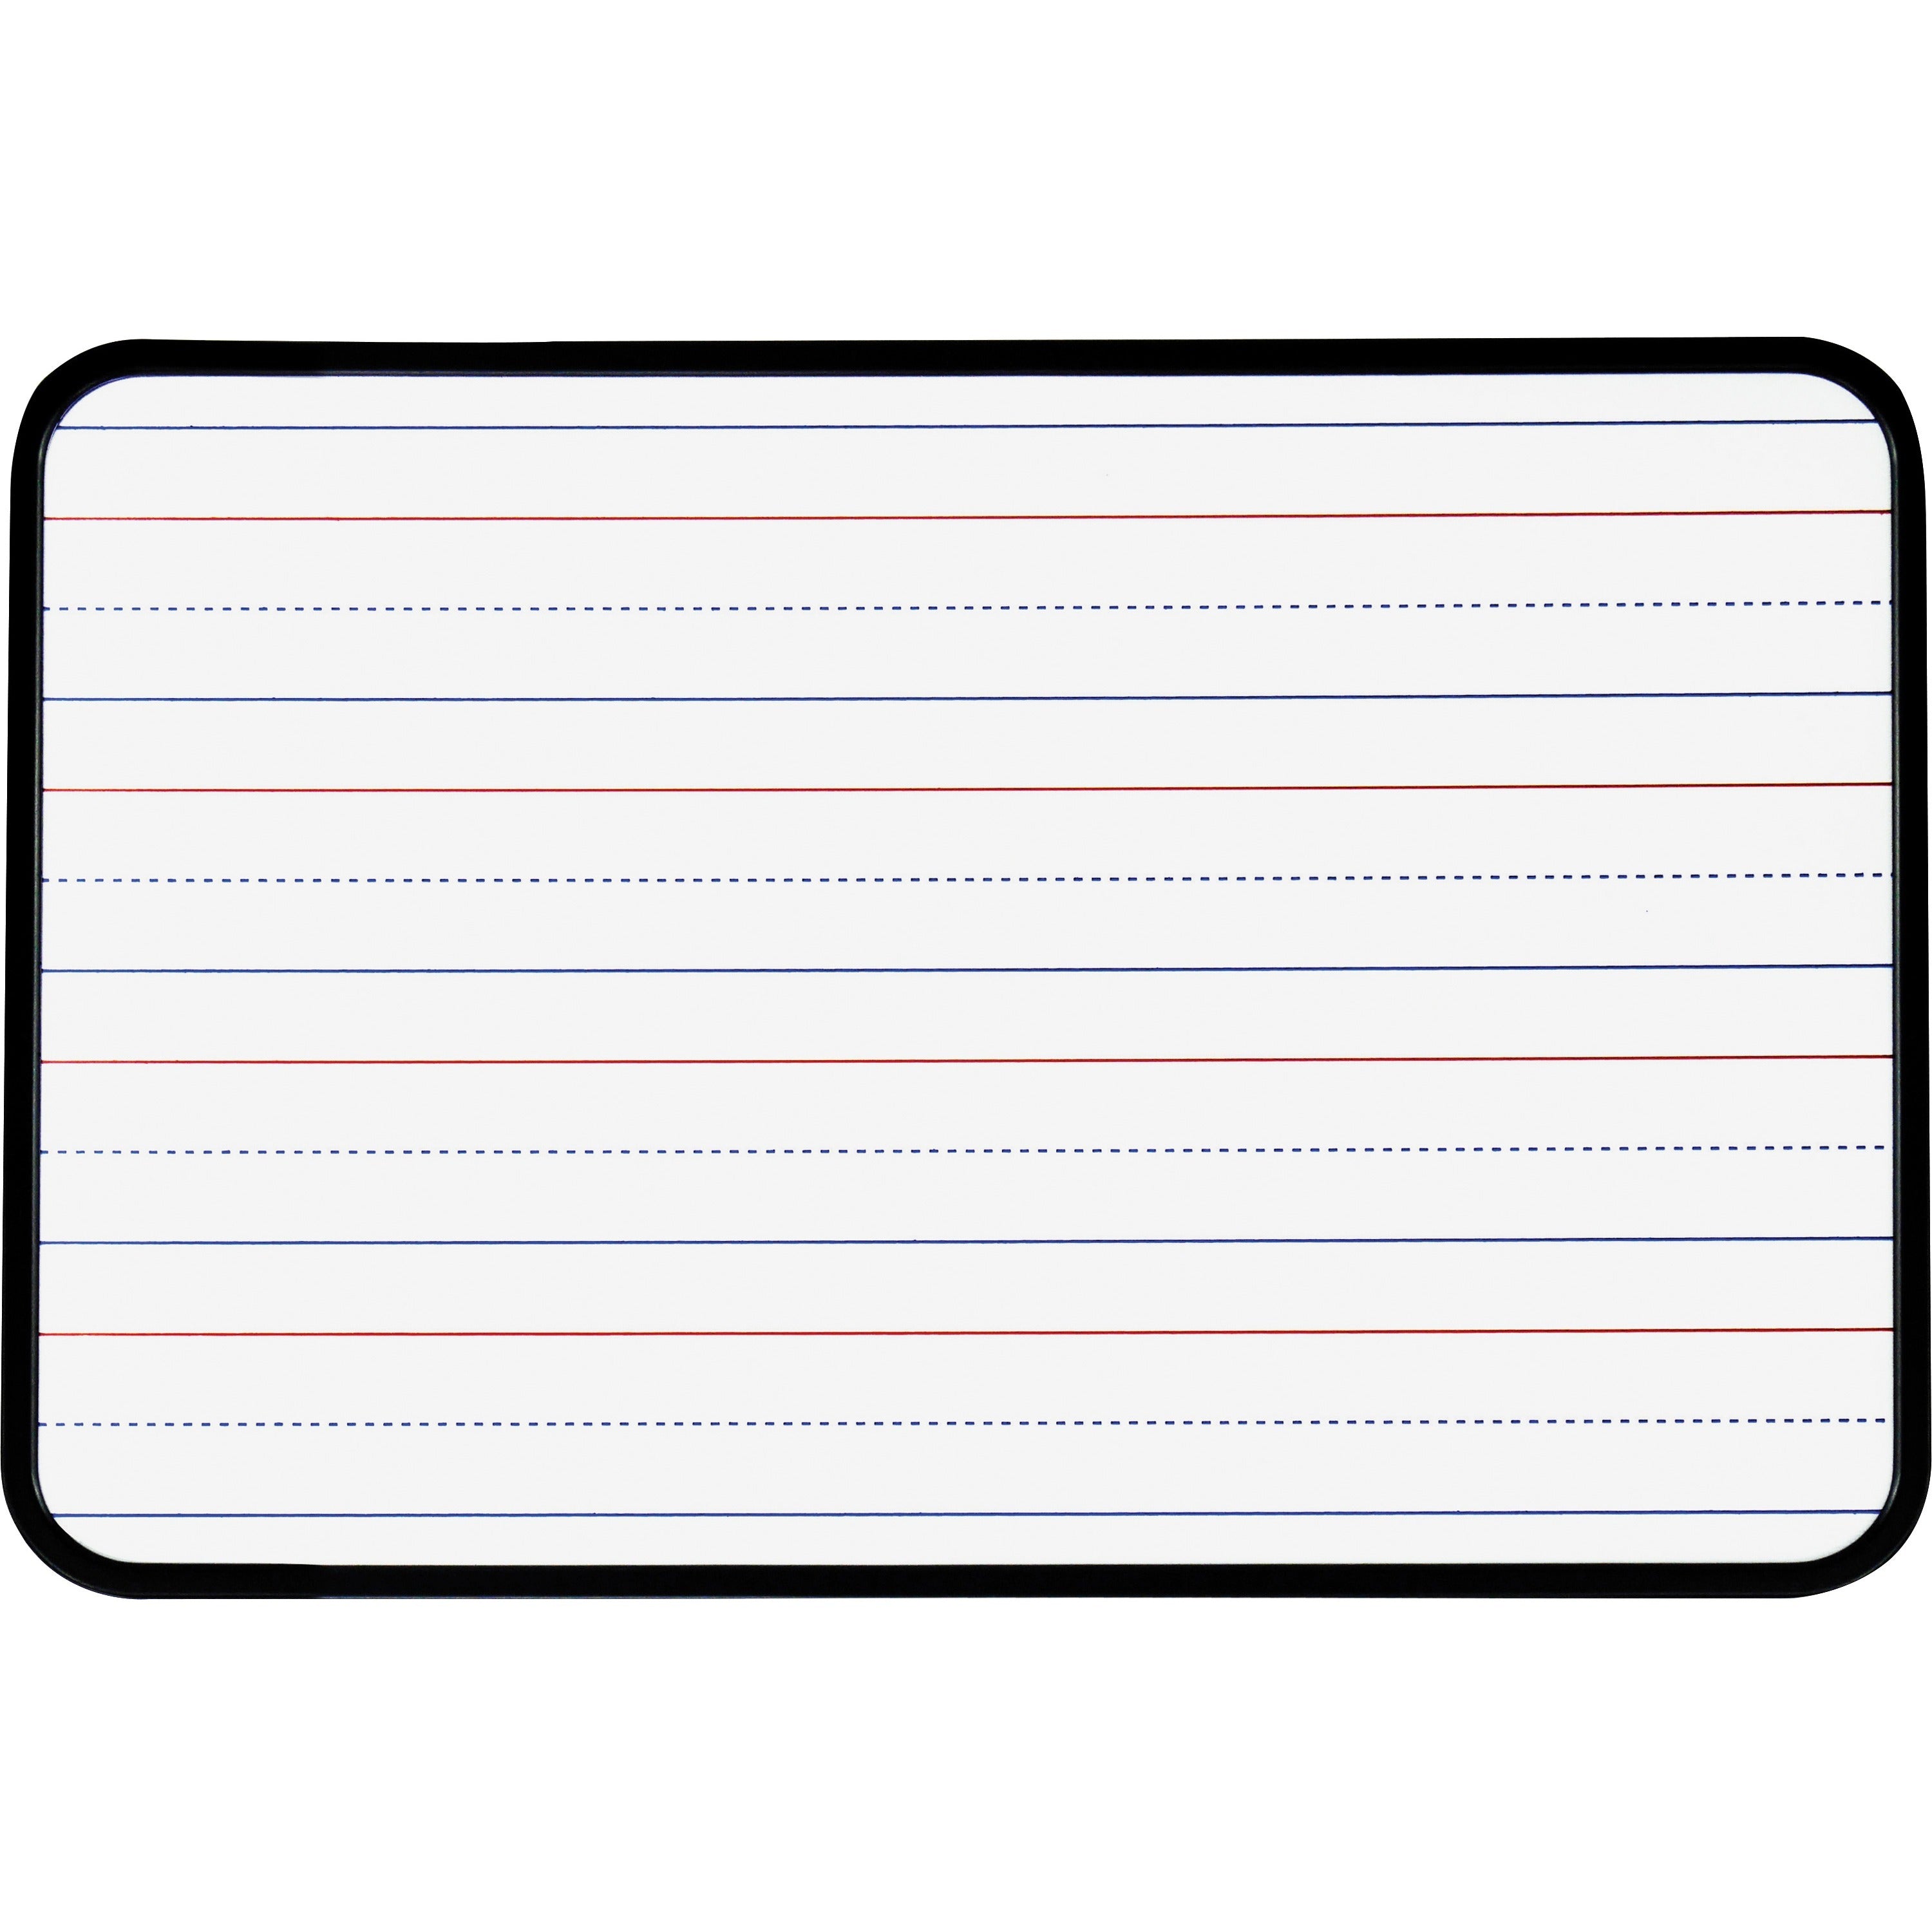 sparco-dry-erase-lap-boards-11-09-ft-width-x-8-07-ft-height-white-surface-plastic-frame-rectangle-magnetic-24-box_spr99818 - 3